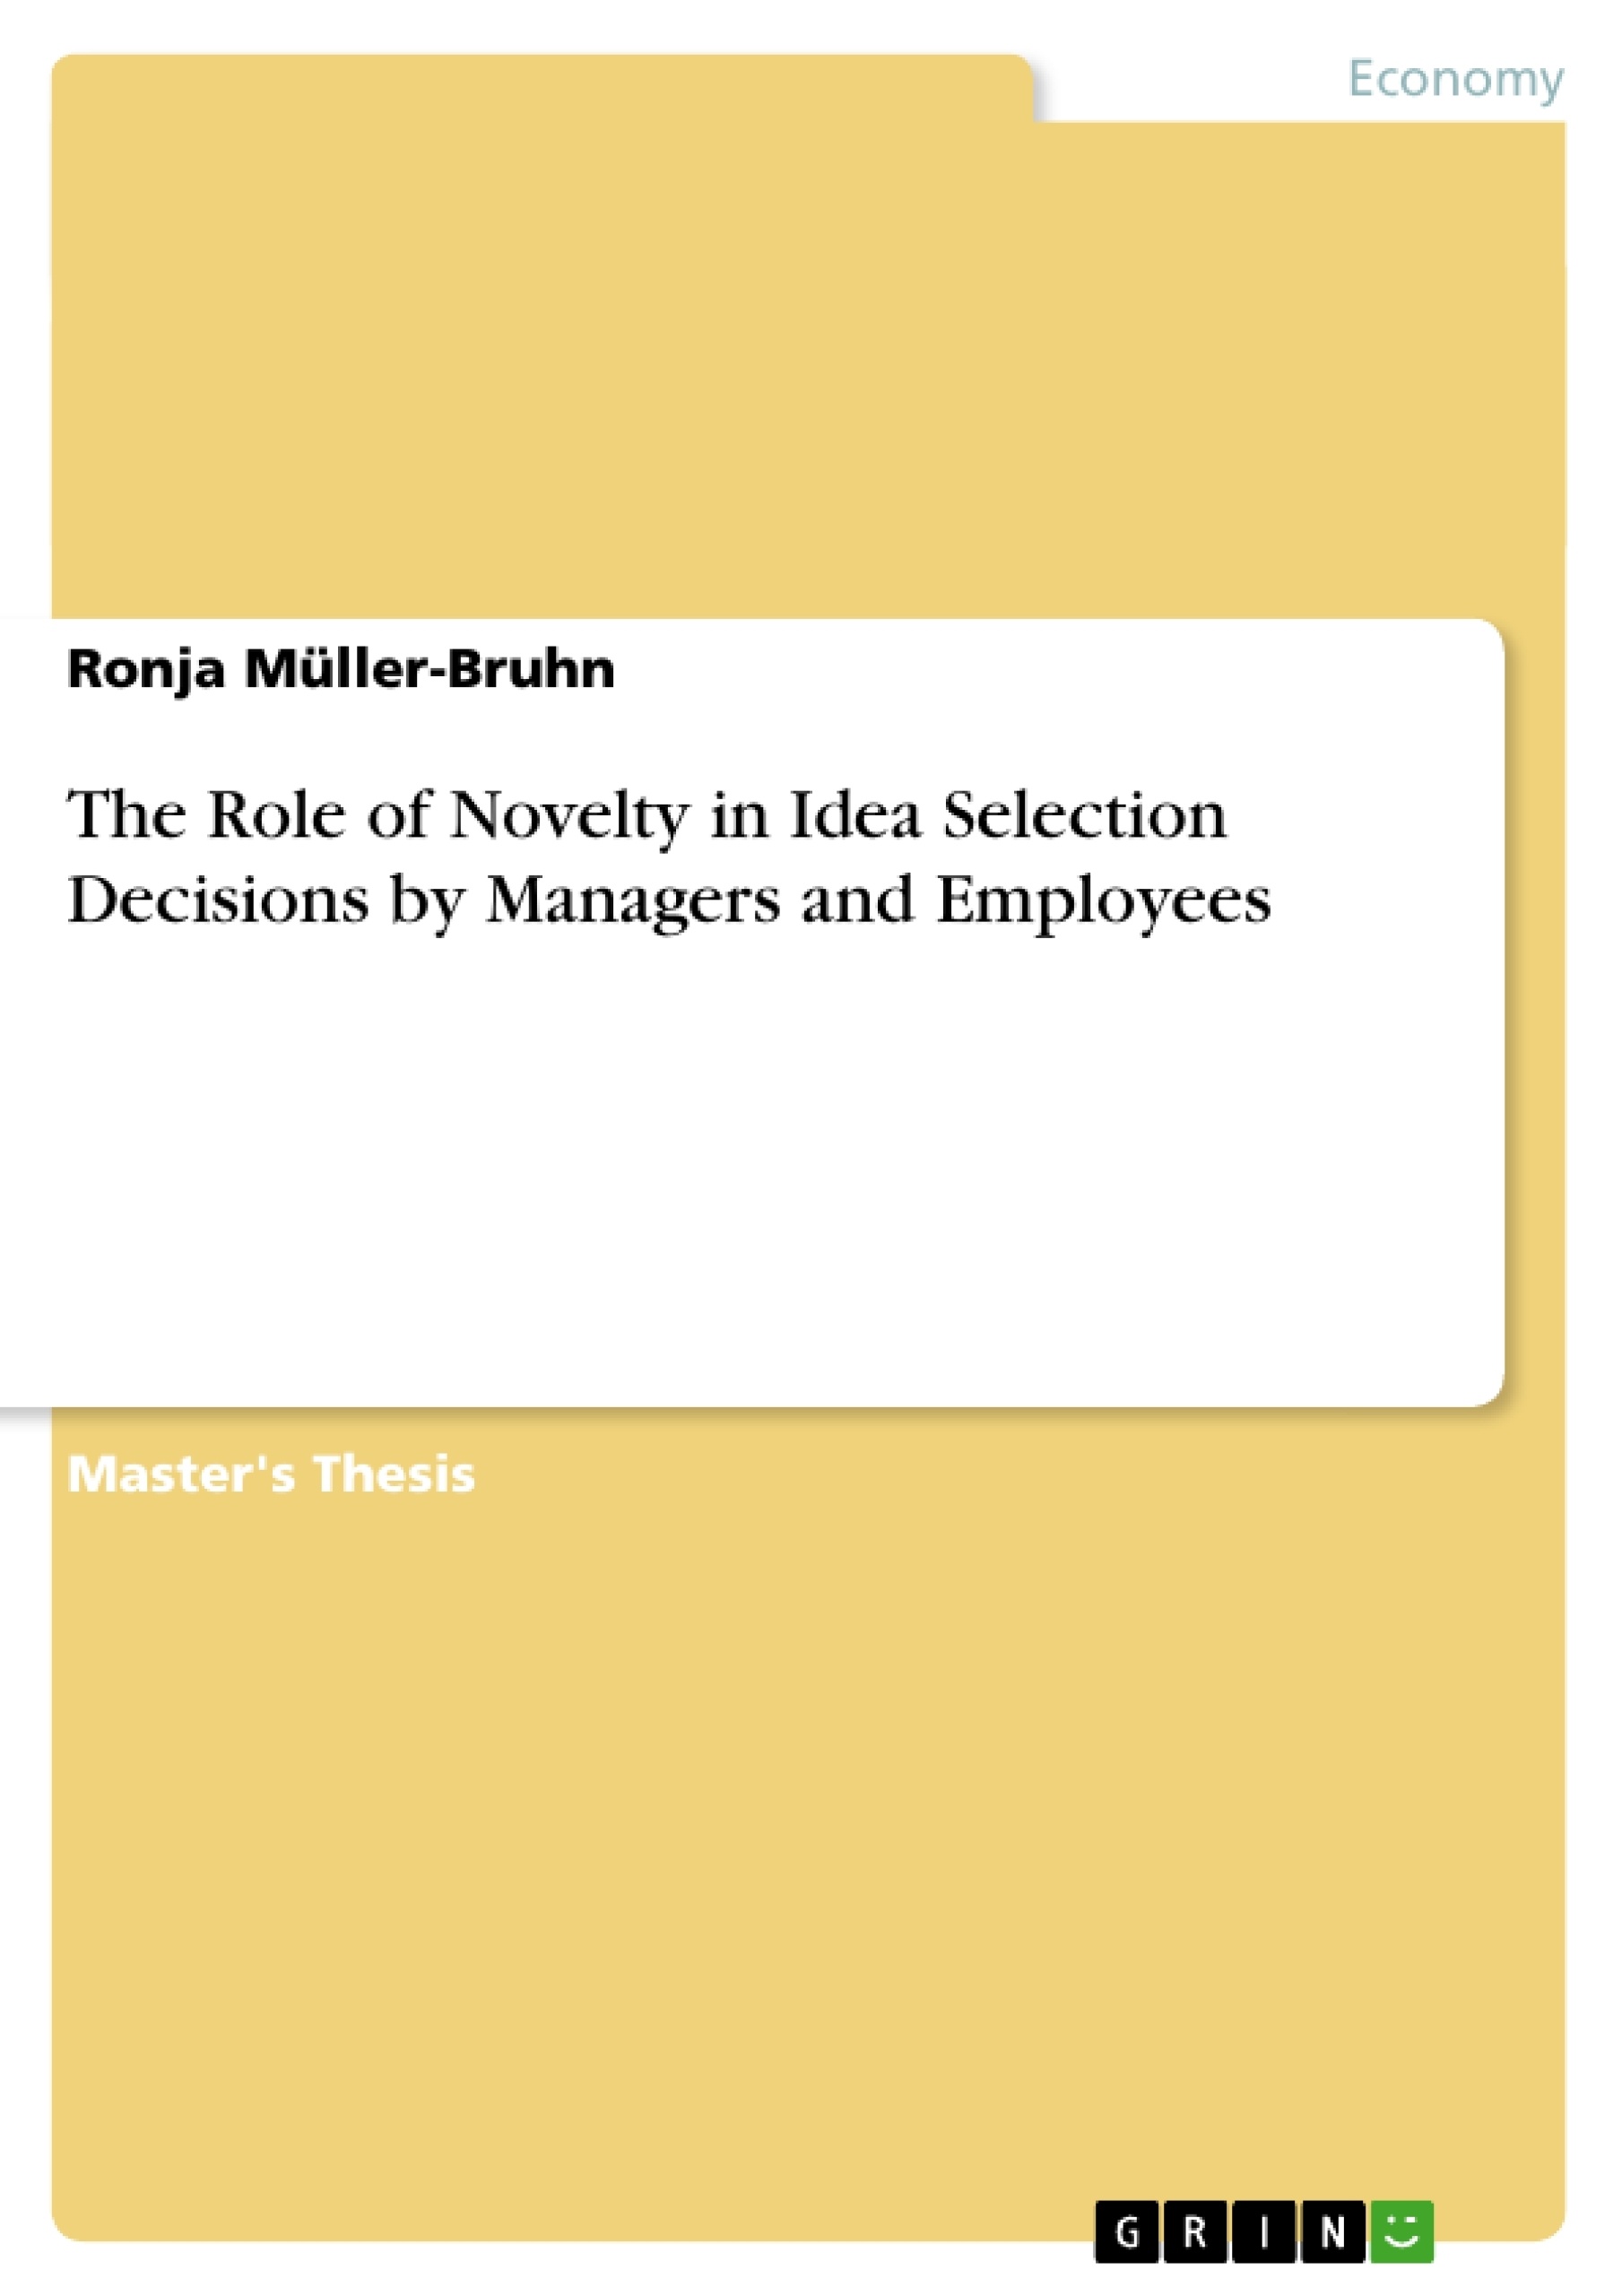 Titel: The Role of Novelty in Idea Selection Decisions by Managers and Employees